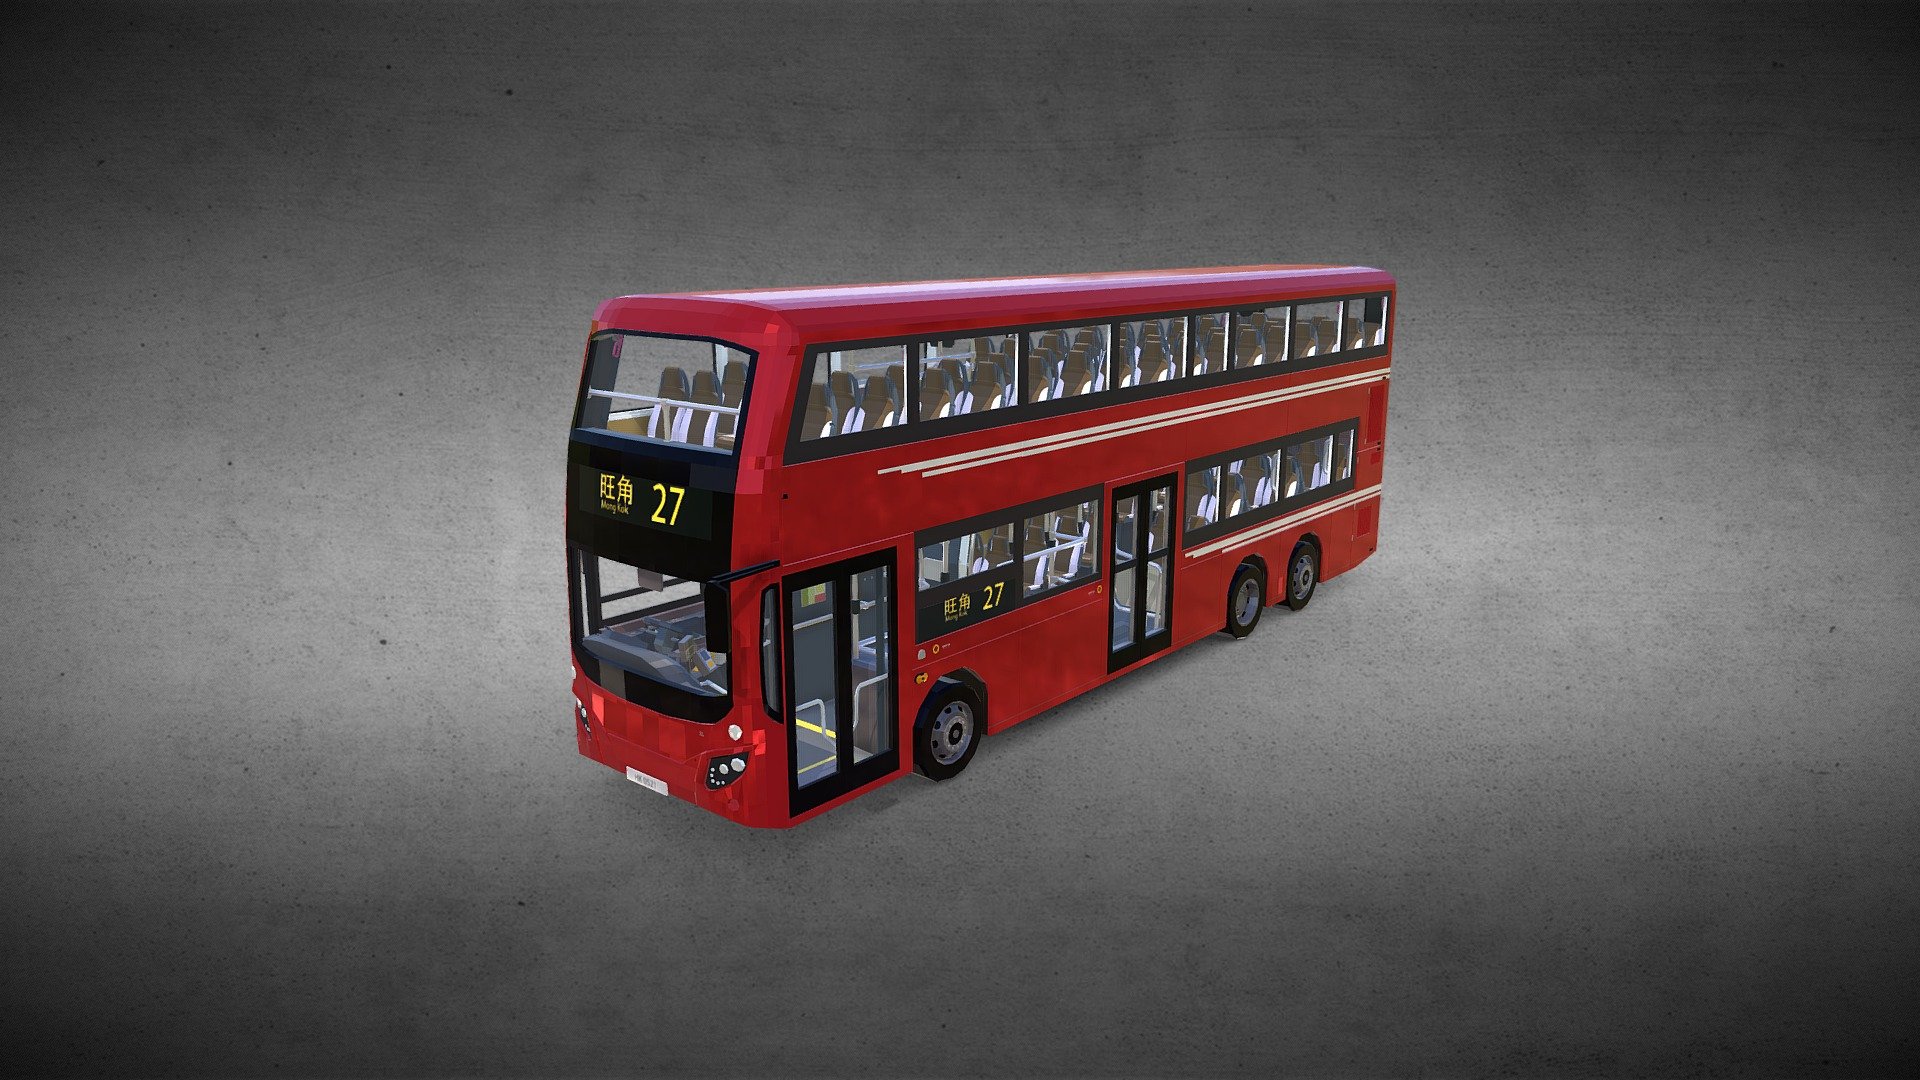 Hong Kong B8L Bus  Version1

The Volvo B8L is a 3-axle bus chassis, for double-decker buses, manufactured by Volvo Buses since 2018, with pre-production batches being produced as early as in 2016.
This model is the Volvo B8L bus, 12 meters long,  MCV EvoSeti body, Upper 59 seats, lower 31 seats.

Visit information below.

Wiki(https://en.wikipedia.org/wiki/Volvo_B8L)
http://hkbric.hkbdc.info/bic/intro/kmb-b8l.htm

My other Models

DrinkPack

Snack

Recycle Bin

RedMiniBus

Building Pack

Visit businessyuen.com, like, follow and download my game in google play 3d model